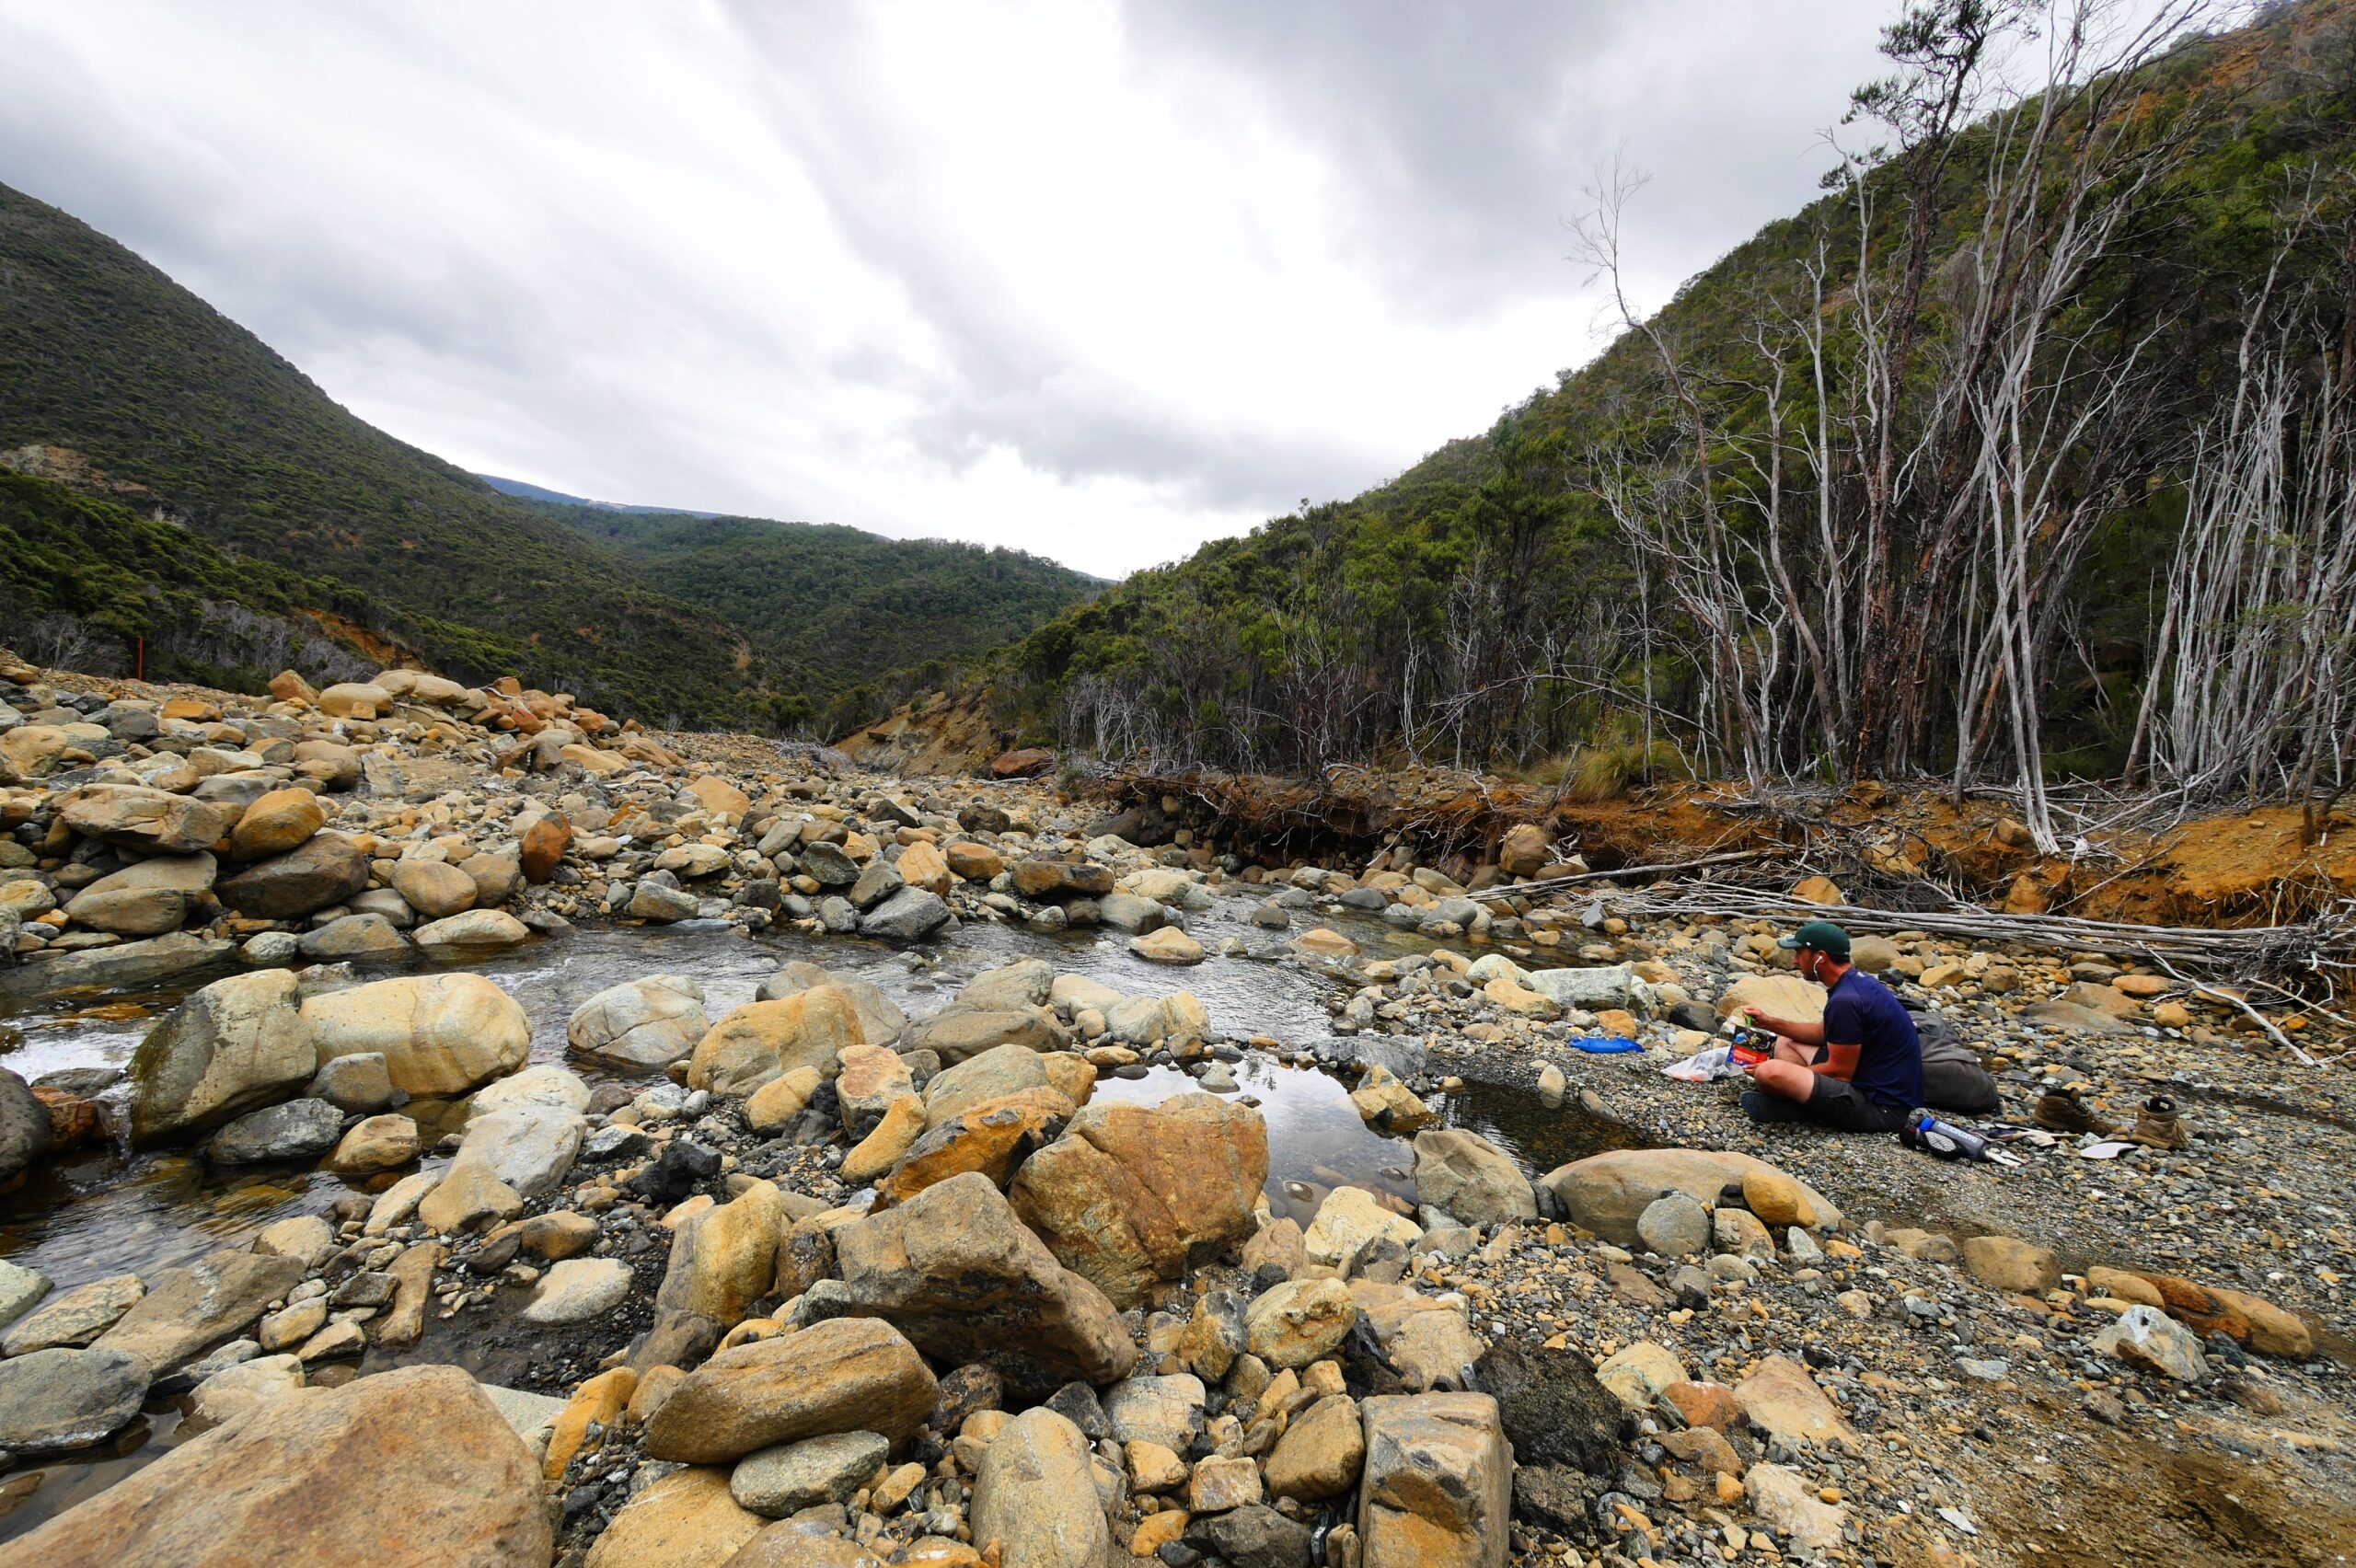 Hank enjoys his last moments in the Richmond Range by eating lunch in a river bed.